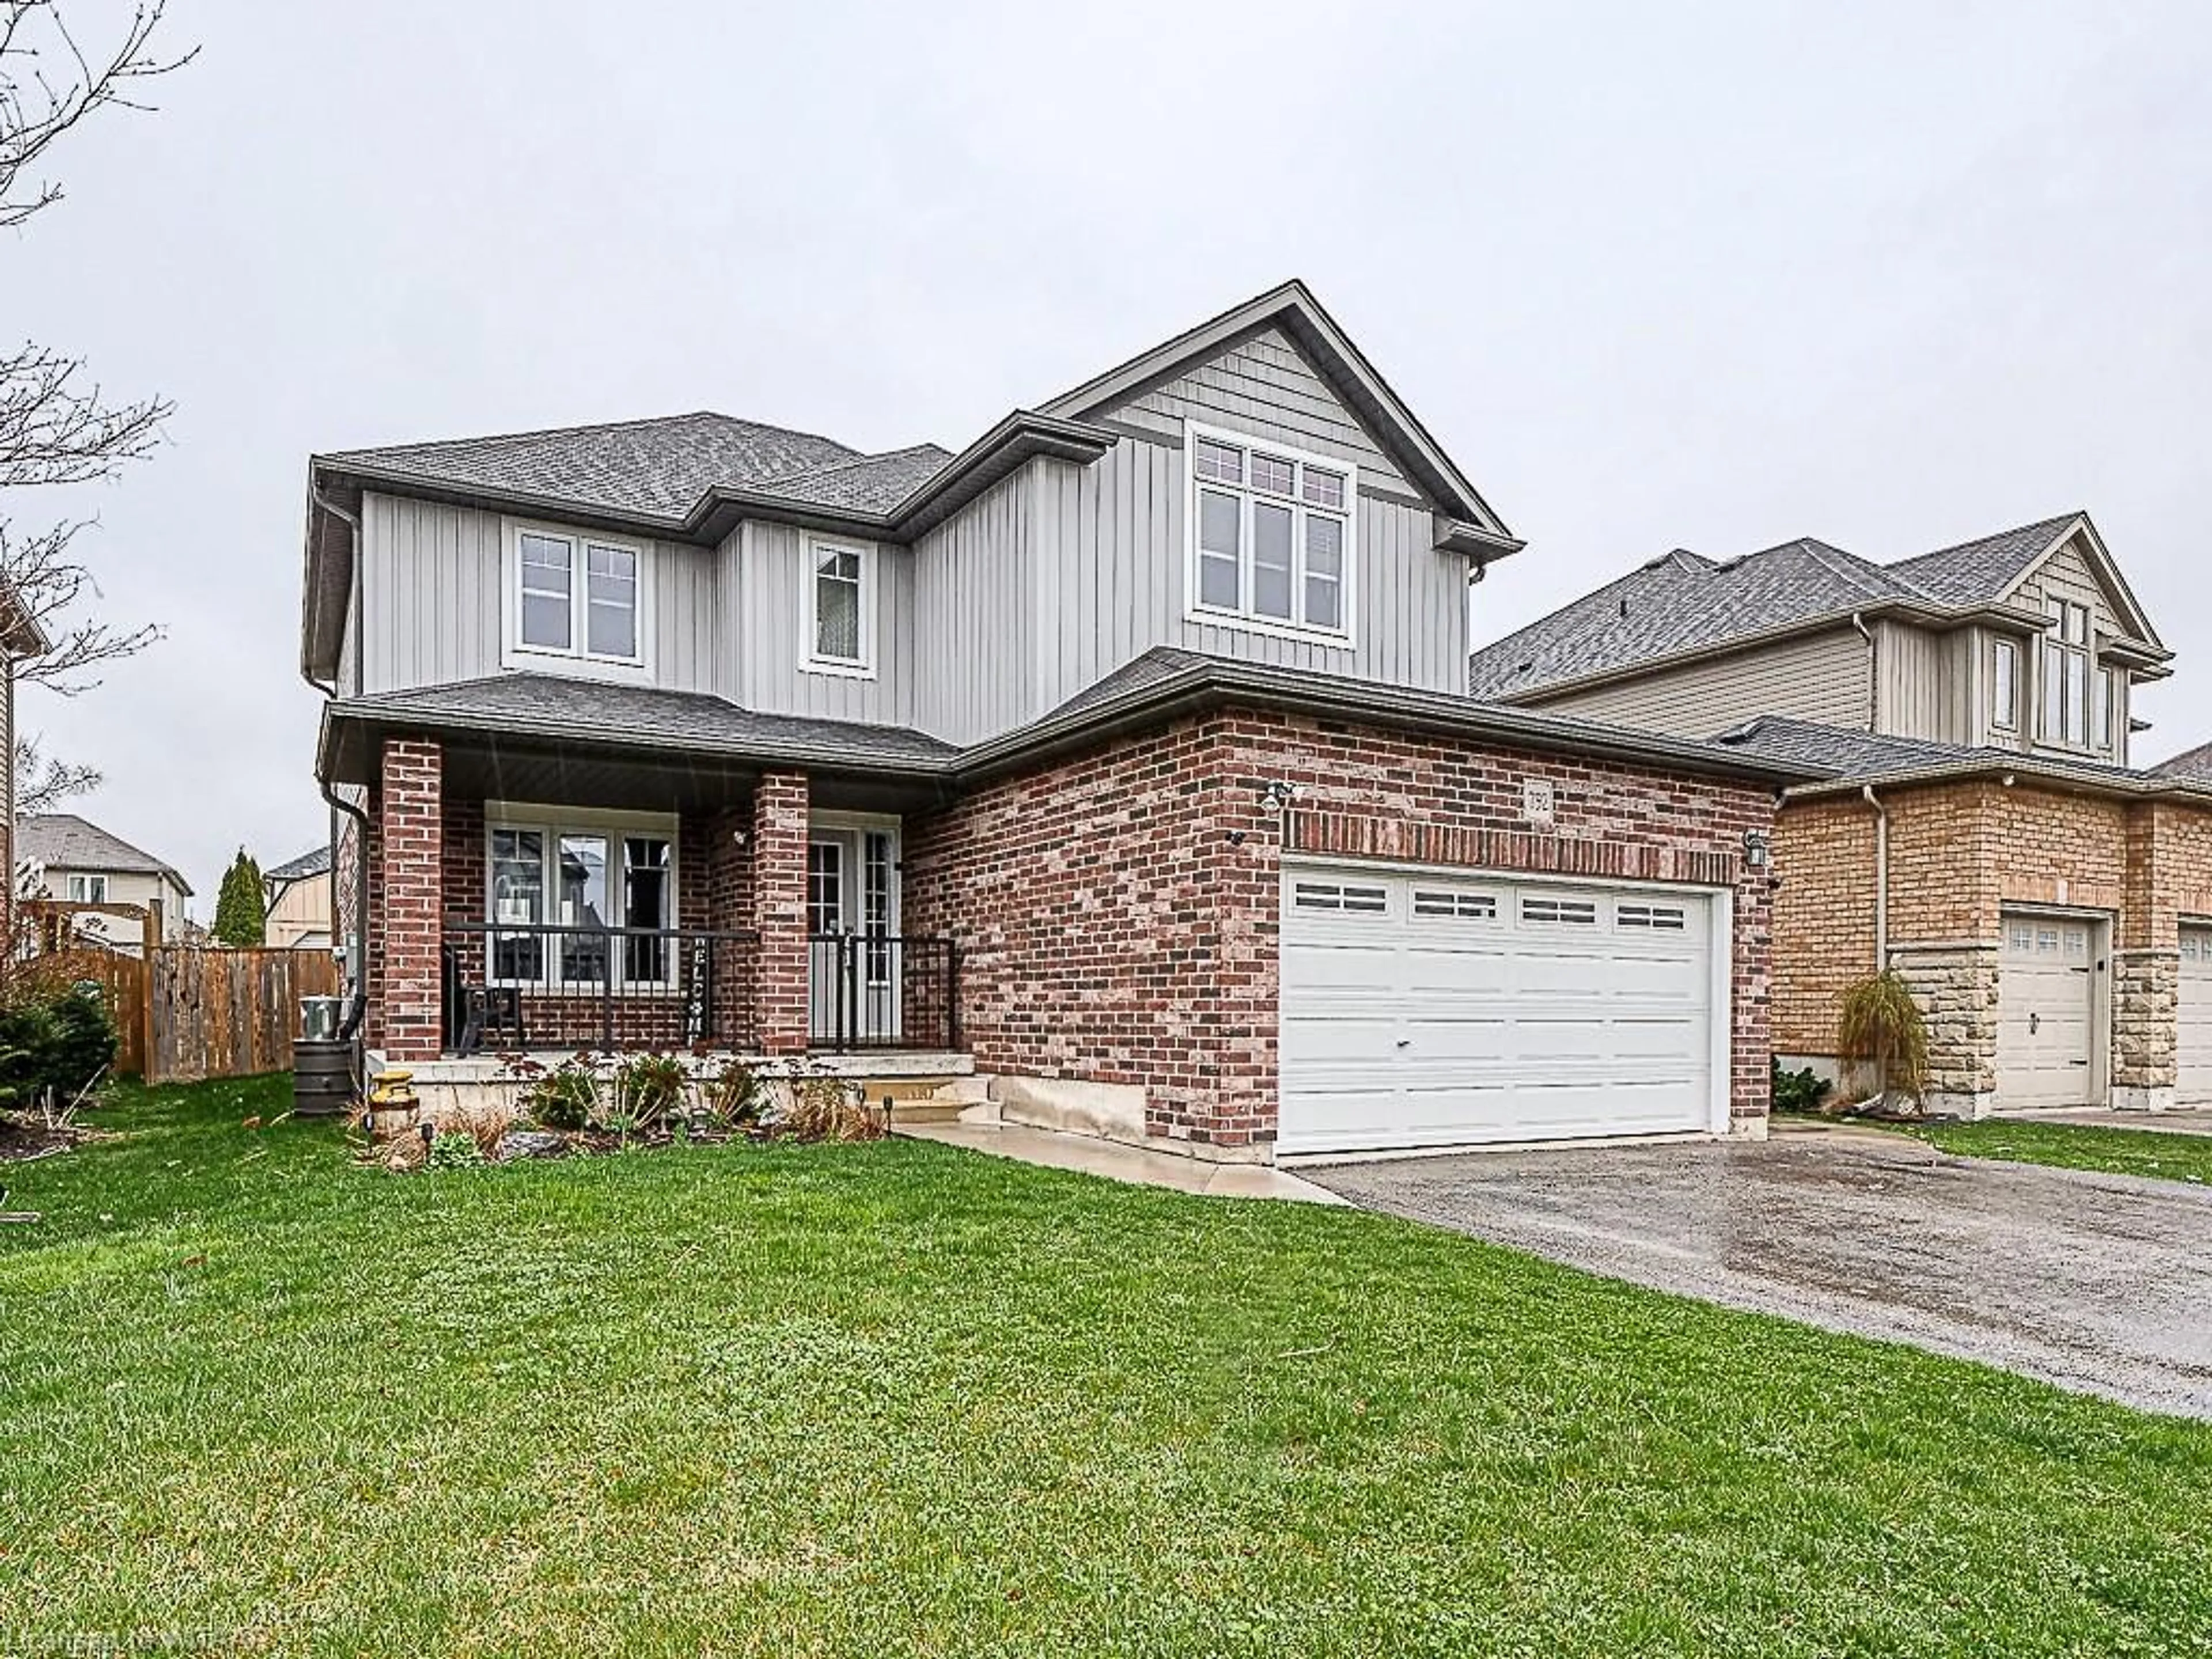 Home with brick exterior material for 792 Spitfire St, Woodstock Ontario N4T 0A9